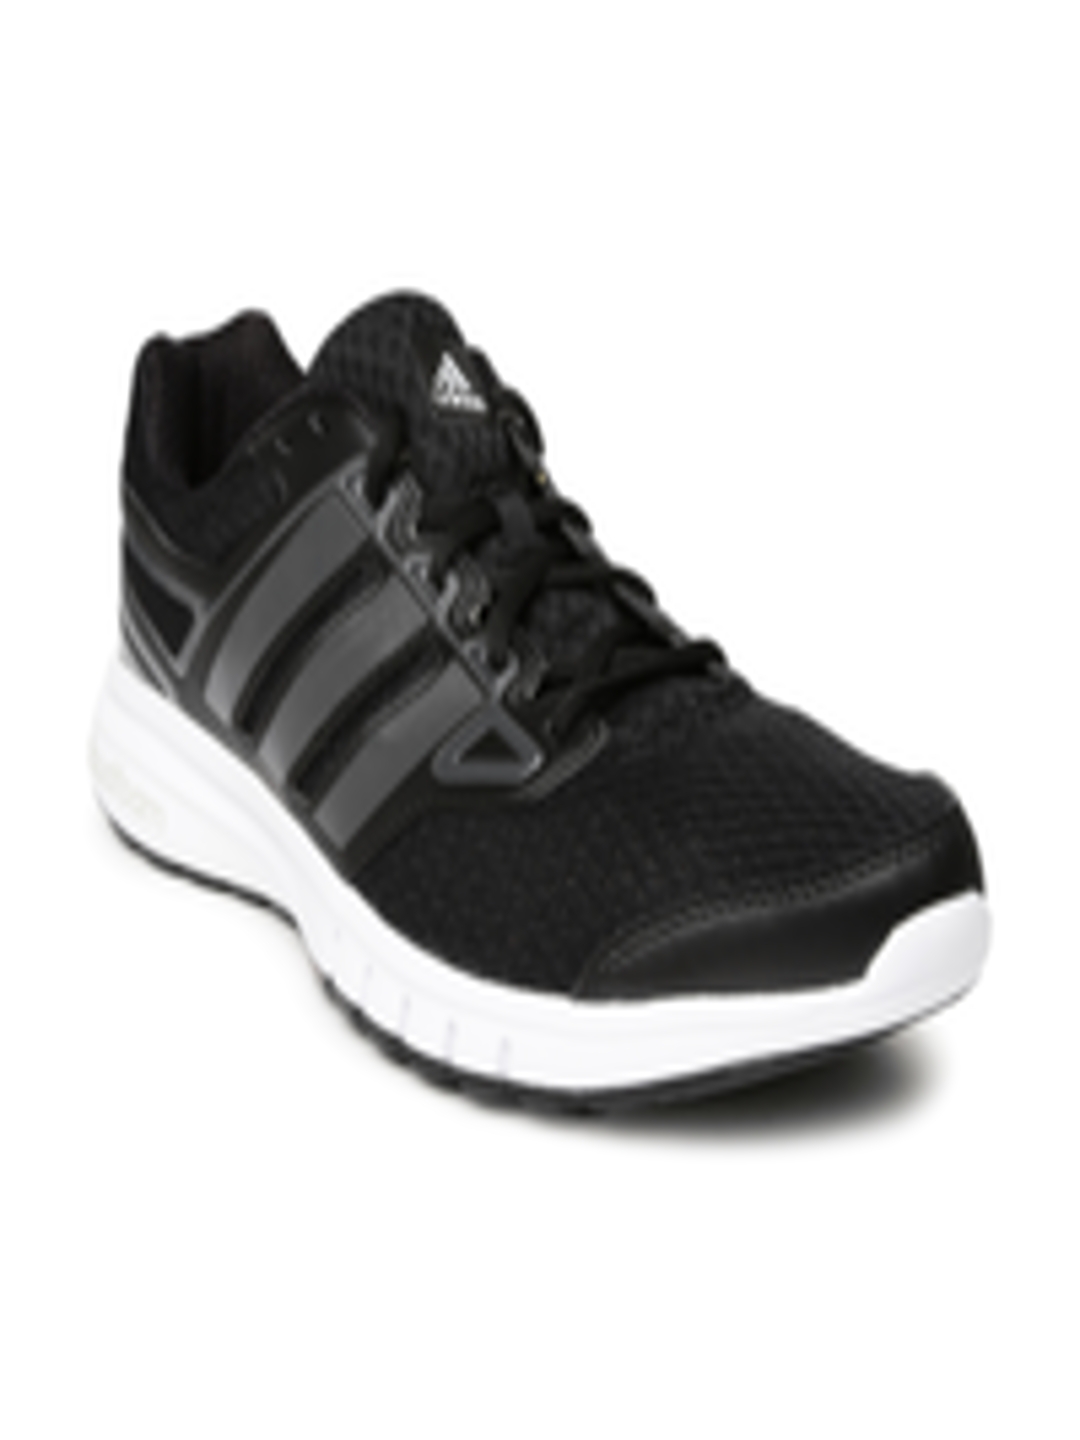 Buy ADIDAS Men Black Galactic Running Shoes - Sports Shoes for Men ...